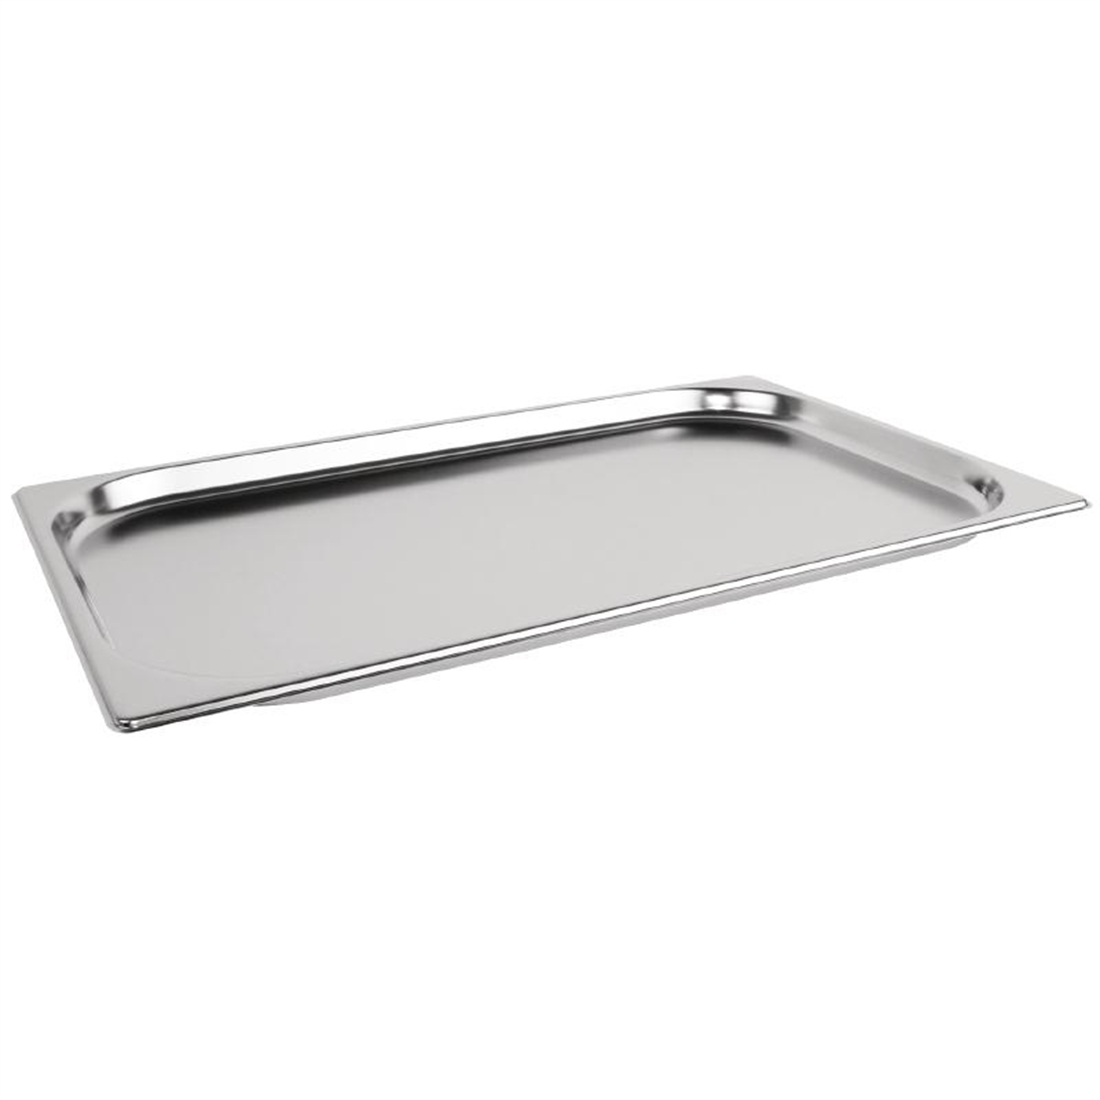 Vogue Heavy Duty Stainless Steel 1/1 Gastronorm Pan 20mm